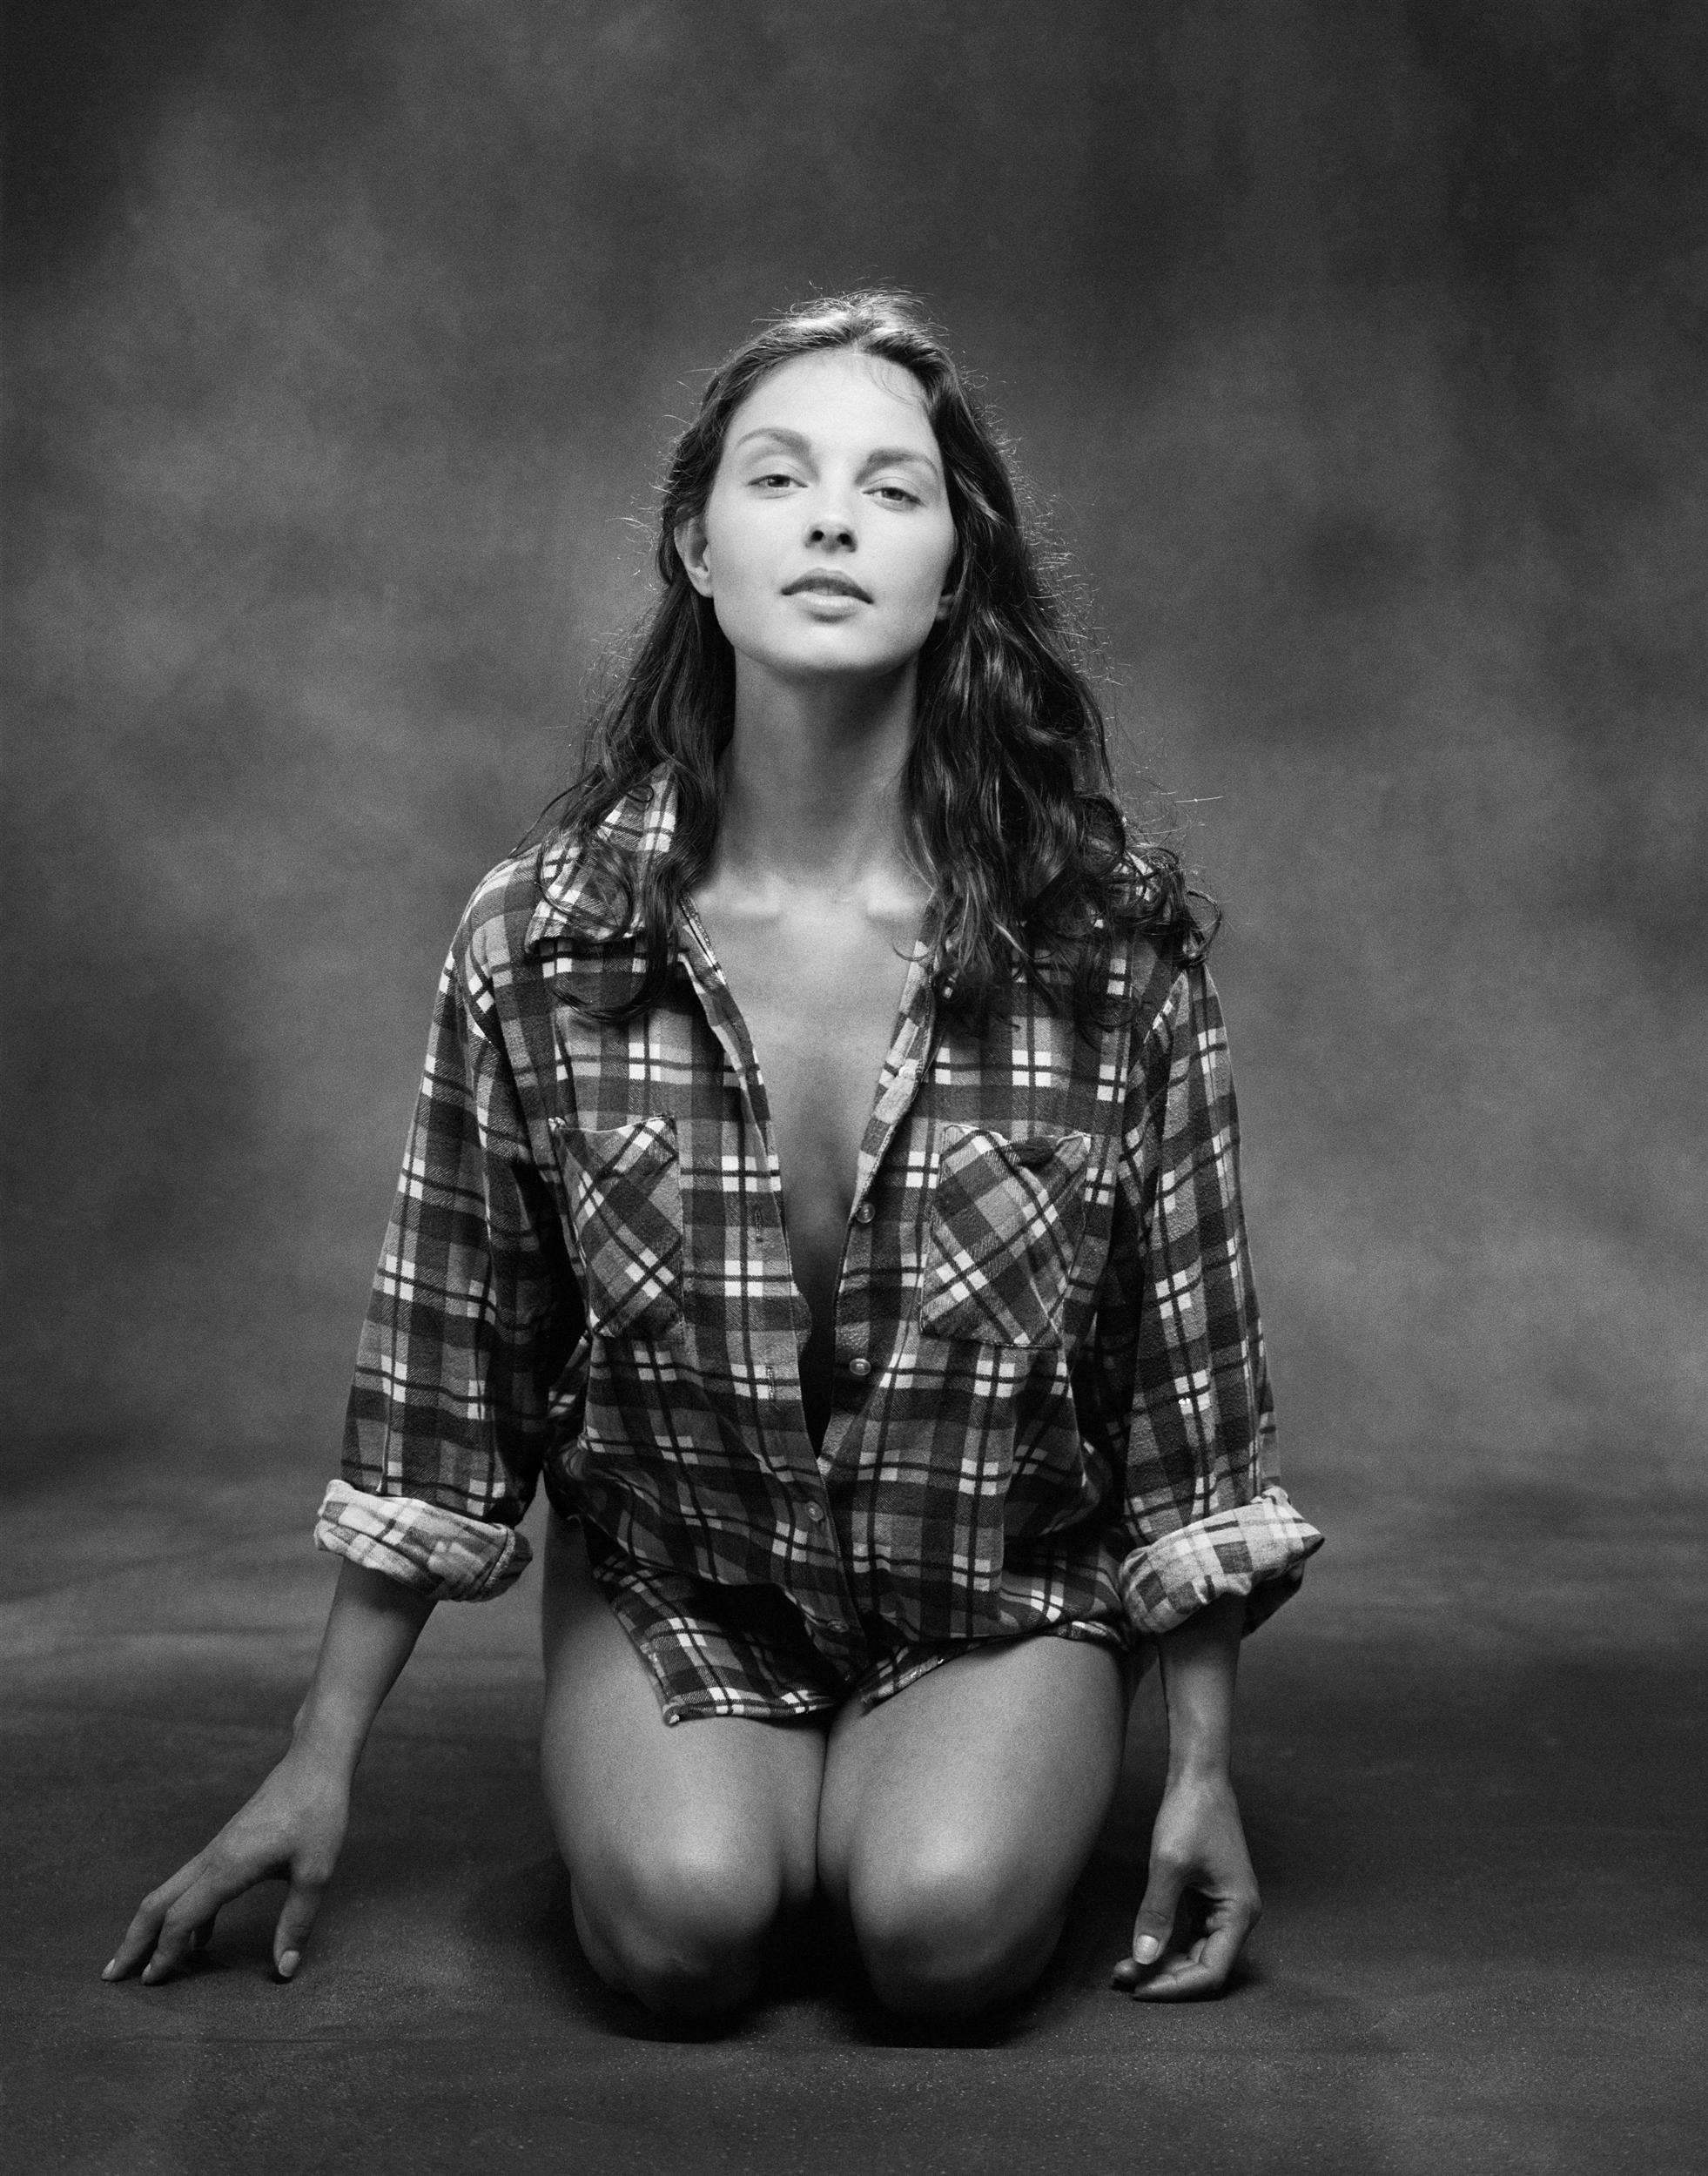 1600x1000  1600x1000 ashley judd wallpaper for computer   Coolwallpapersme